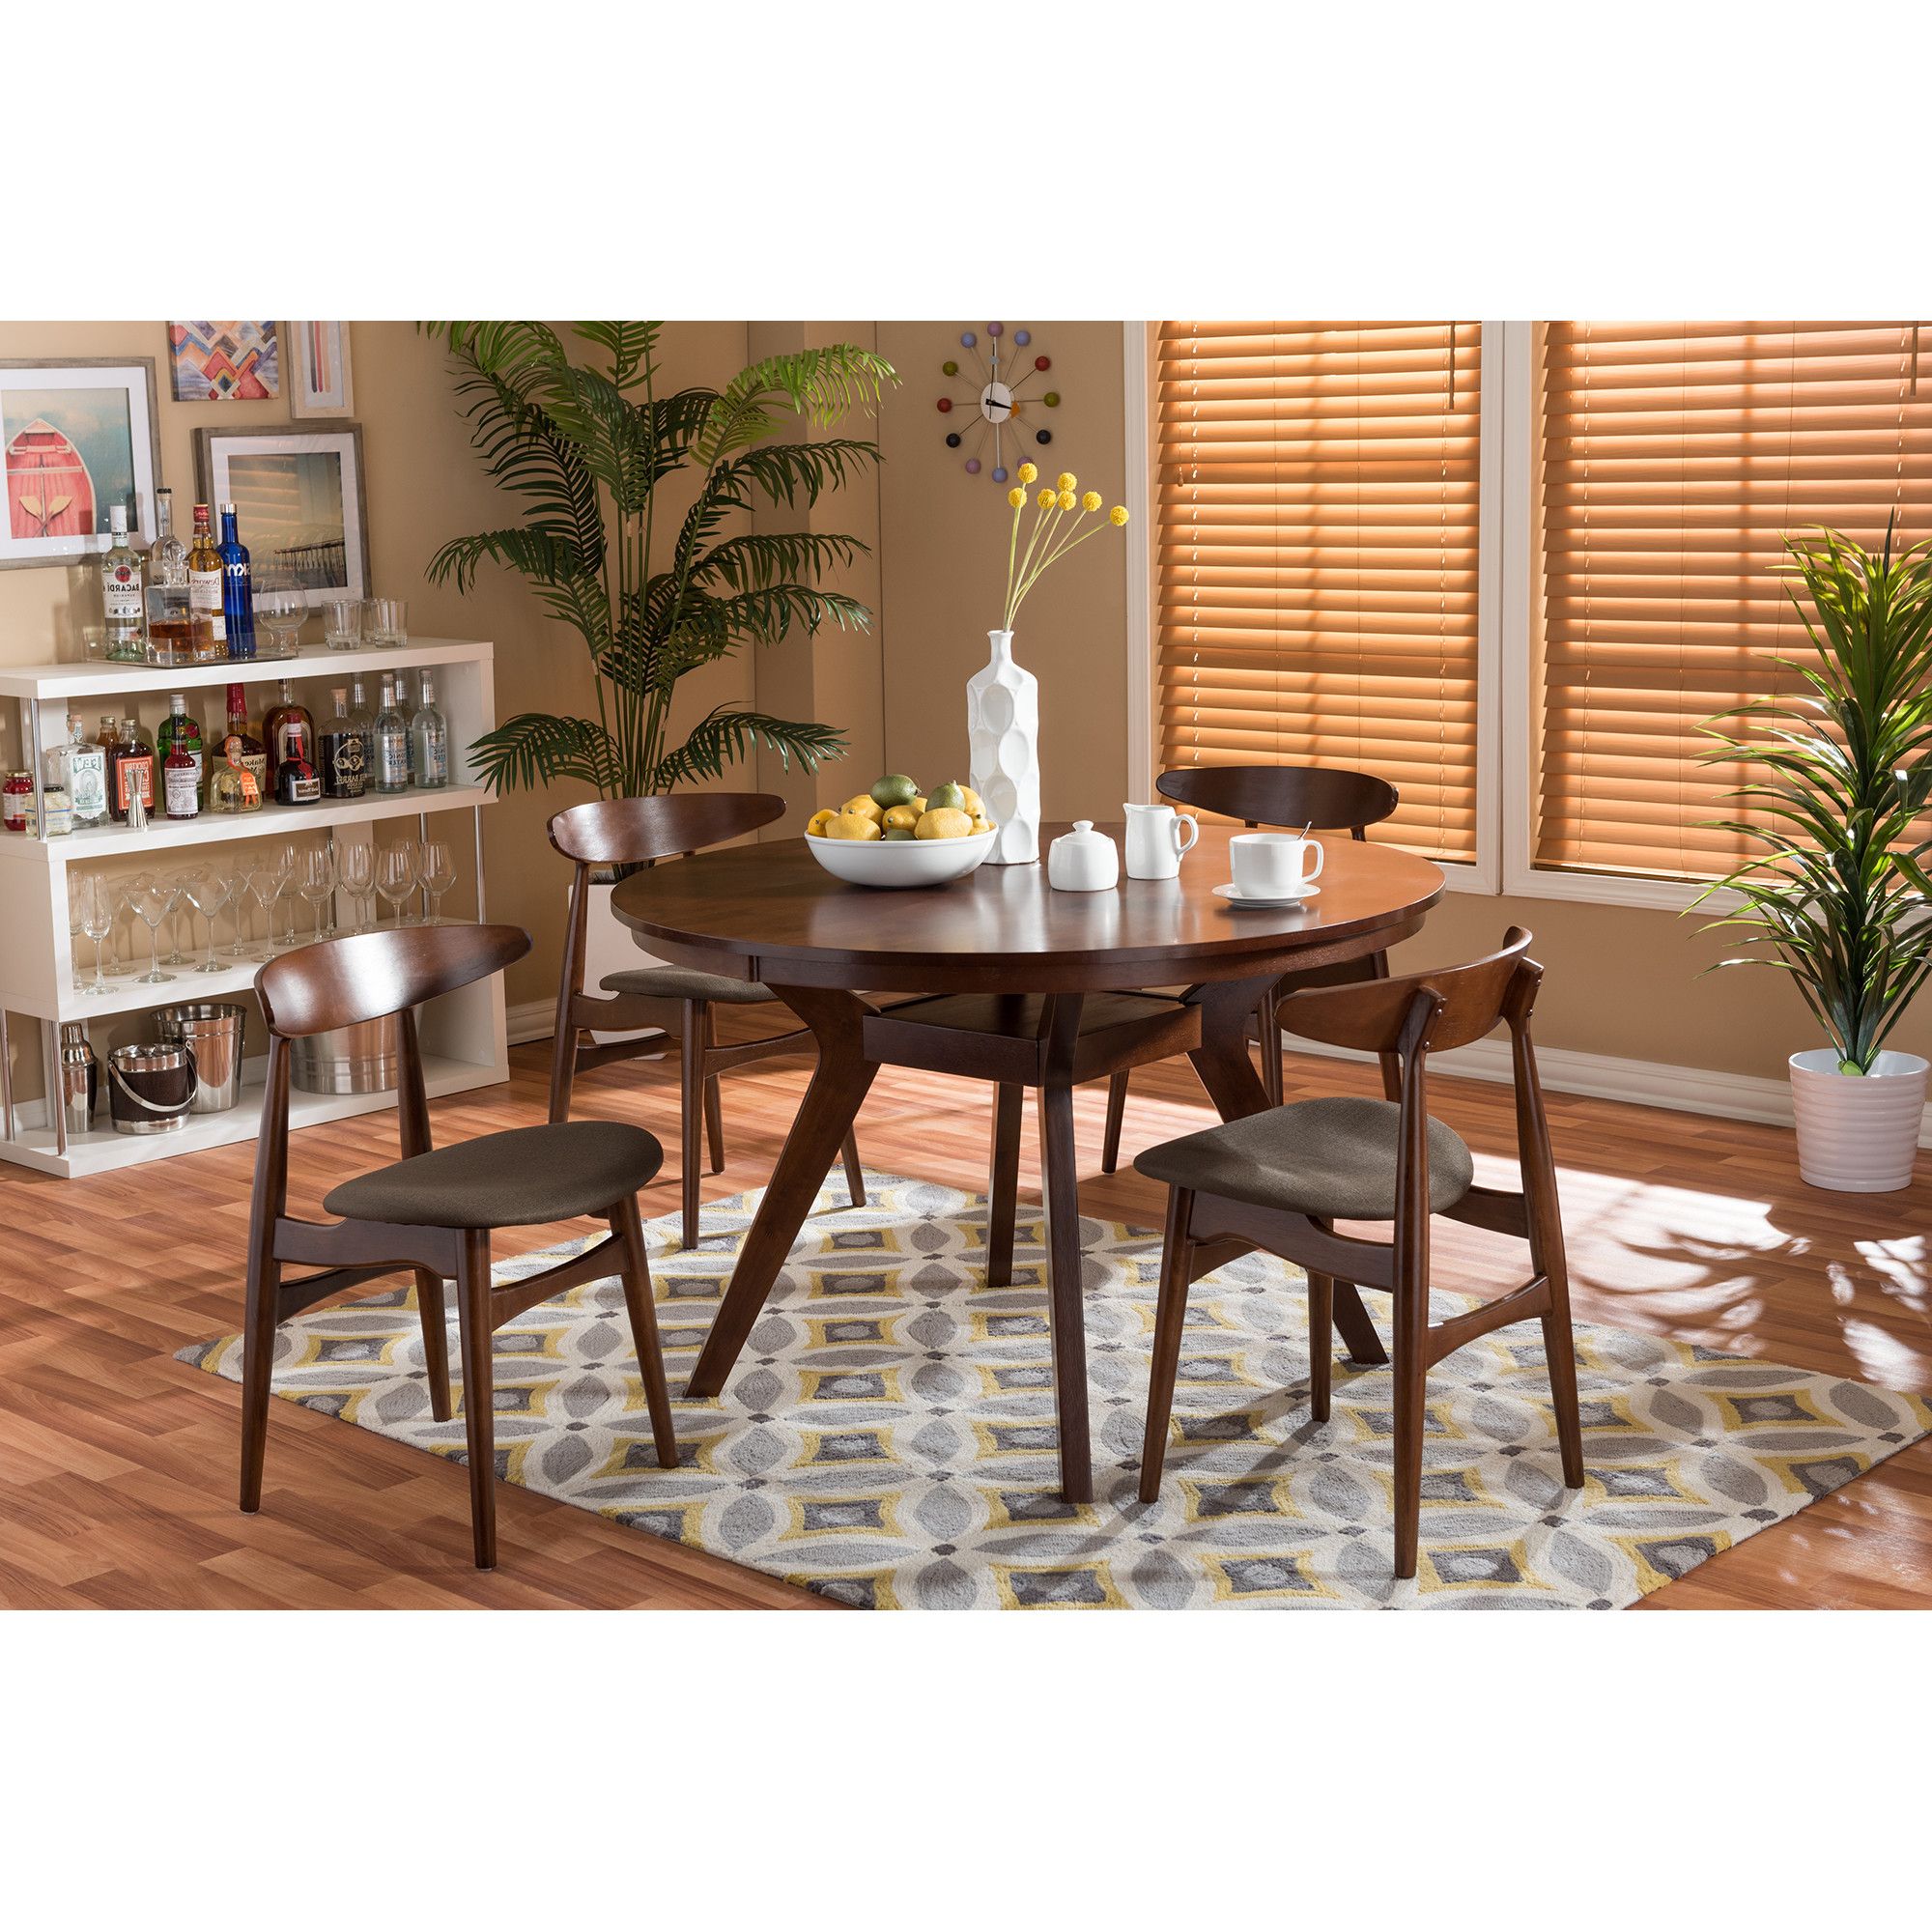 Baxton Studio Keitaro 5 Piece Dining Sets Inside Most Up To Date Wholesale Dining Sets. Room Pier One (View 6 of 20)